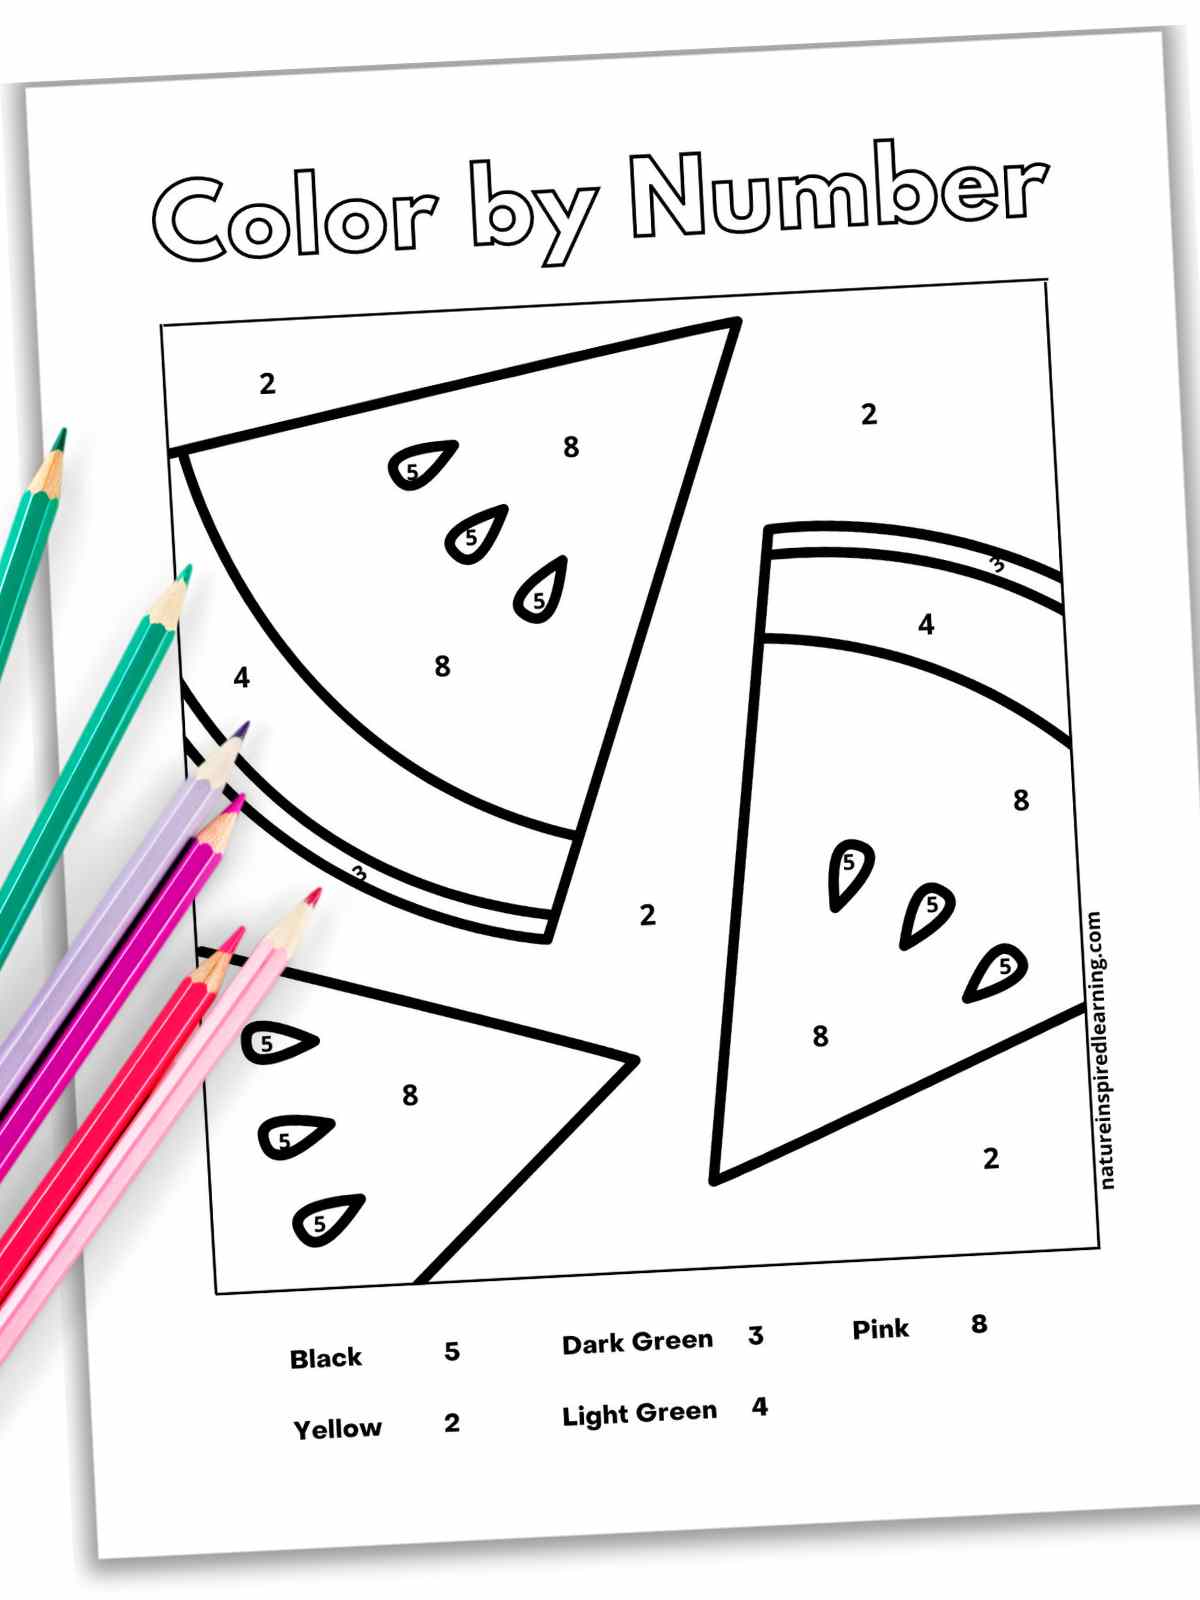 black and white color by number worksheet with watermelon slices slanted with a drop shadow colored pencils left side